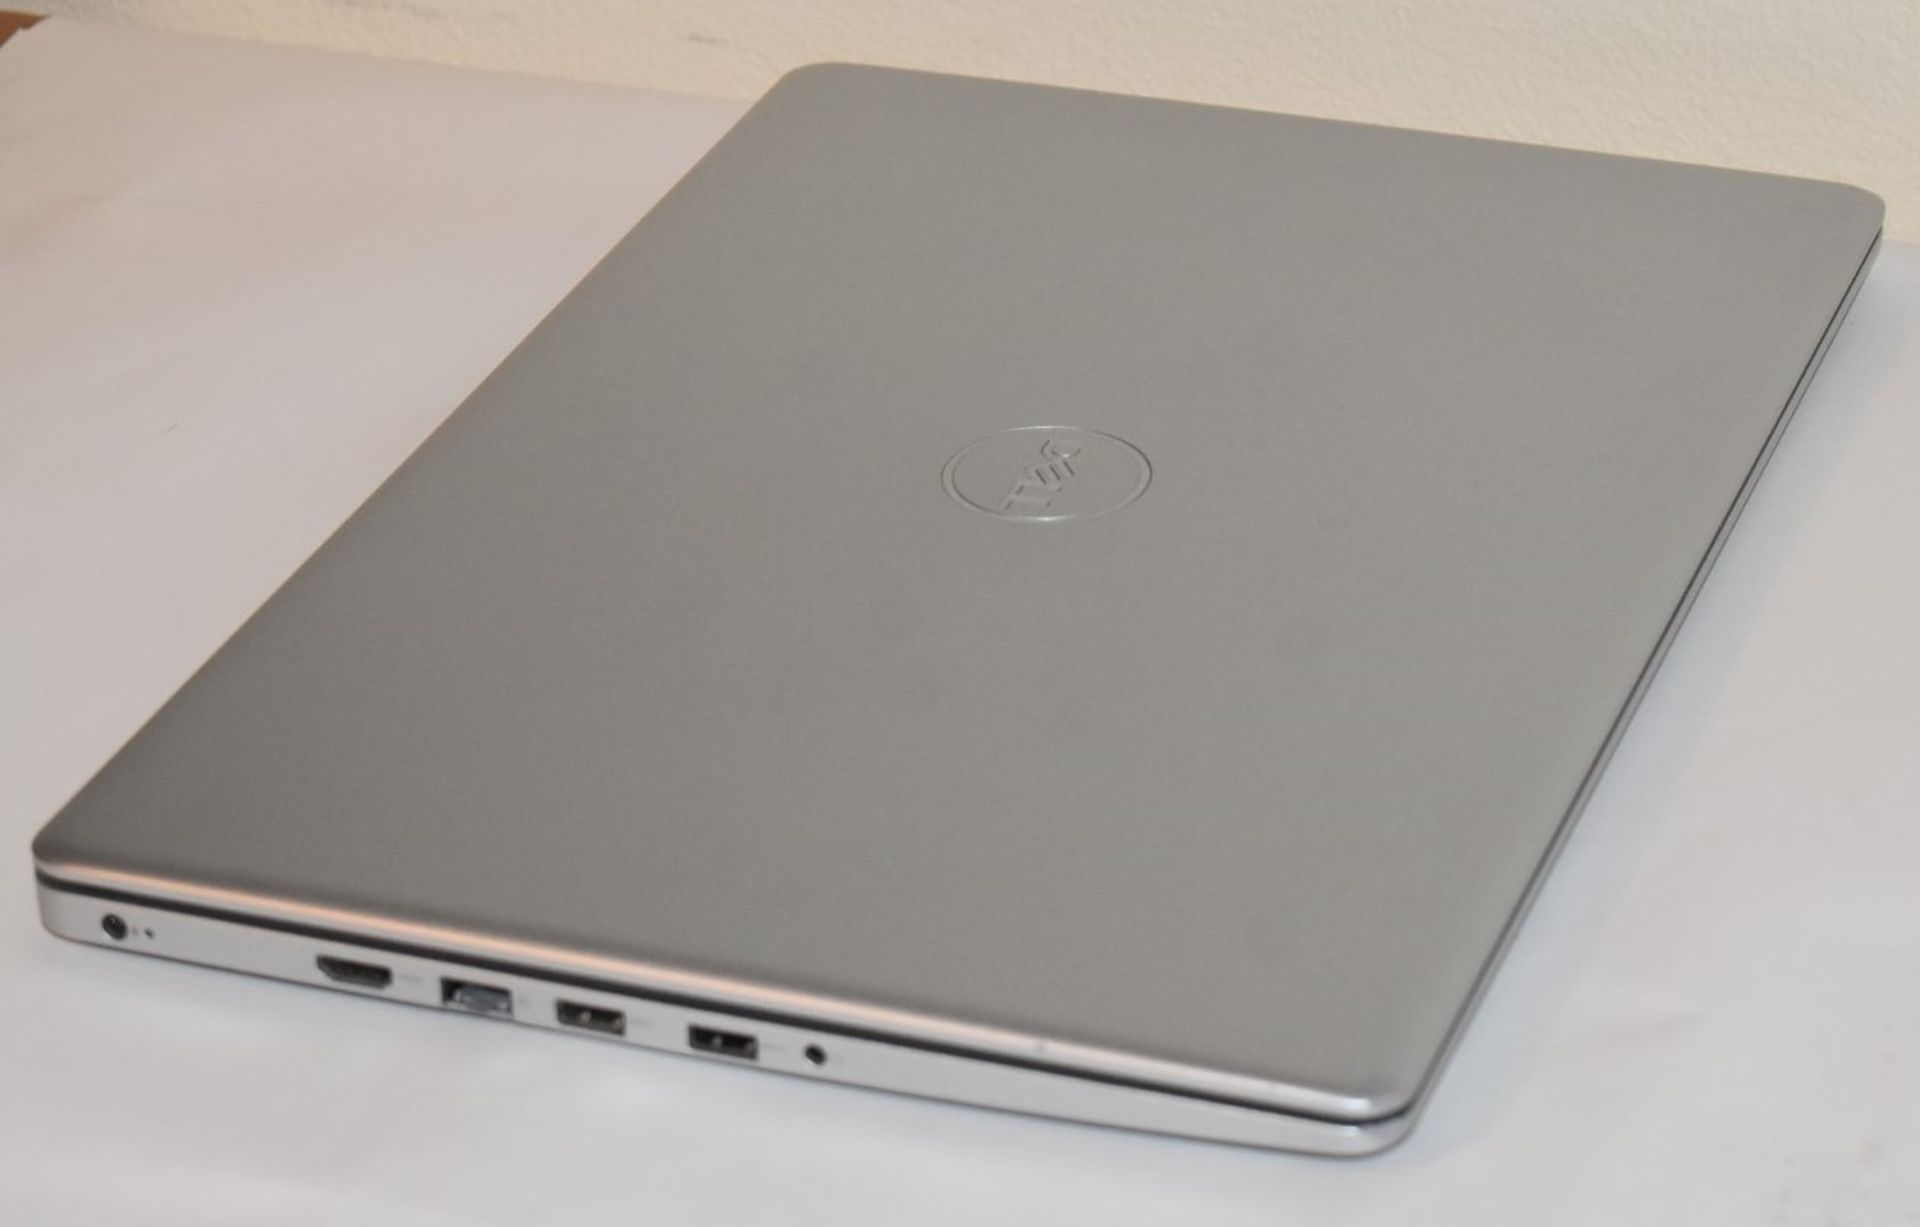 1 x Dell Inspiron 15 5593 Laptop Featuring a 10th Gen Core i5-1035G1 3.6ghz Quad Core Processor, - Image 14 of 18